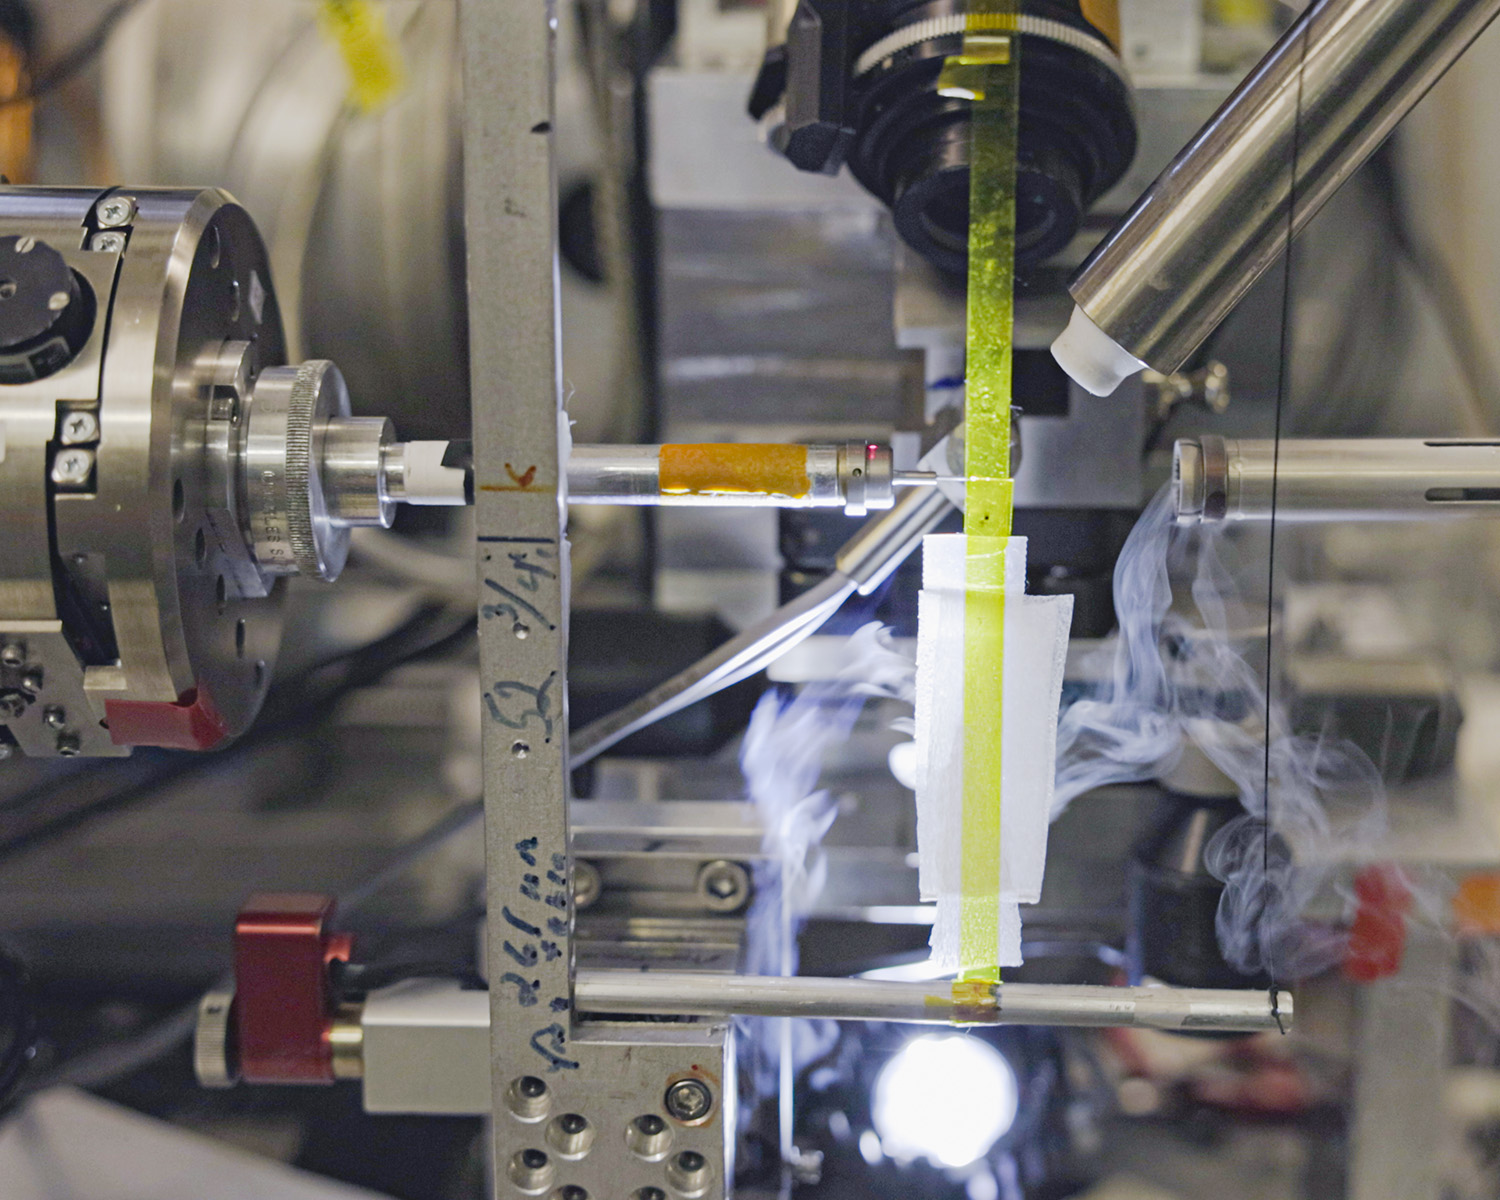 Sample being placed in the beamline